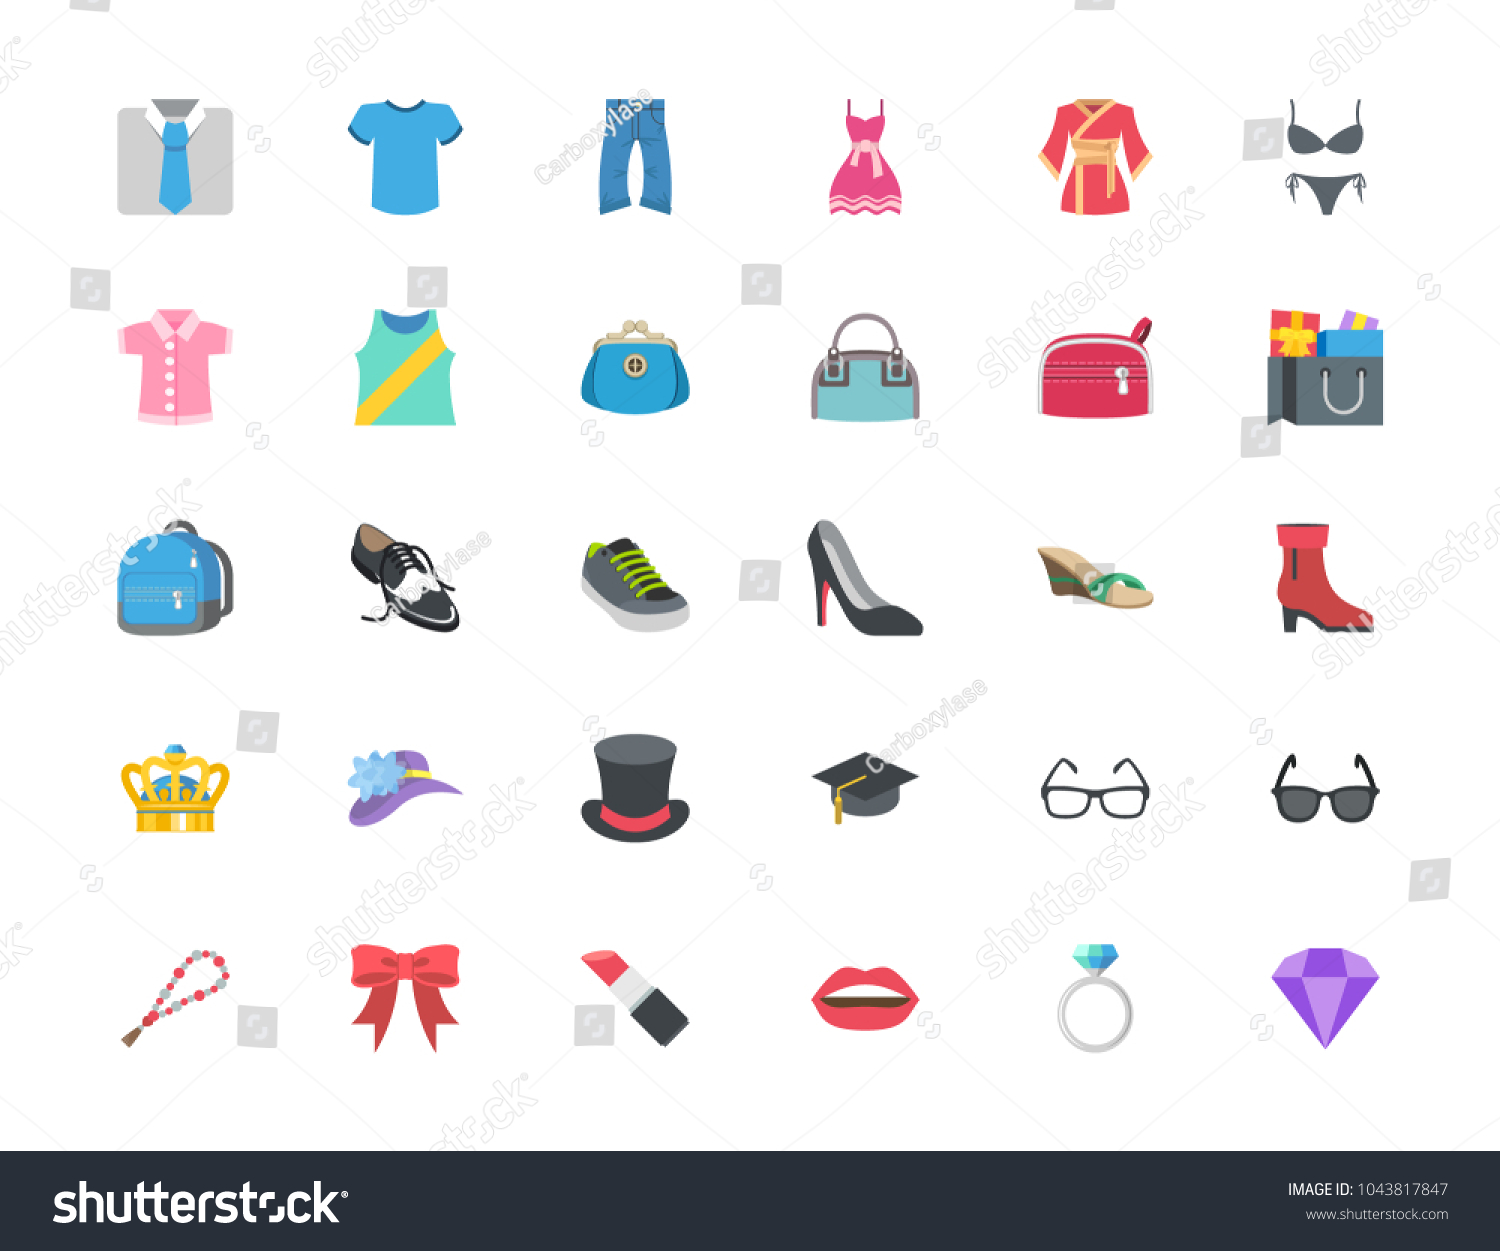 SVG of Fashion, menswear, womenswear, accessories, ring, hat, shirts, wears, apparels, dresses, clothes vector illustration flat style symbol, shopping emoticons, emojis, icons set, collection, pack, sticker svg